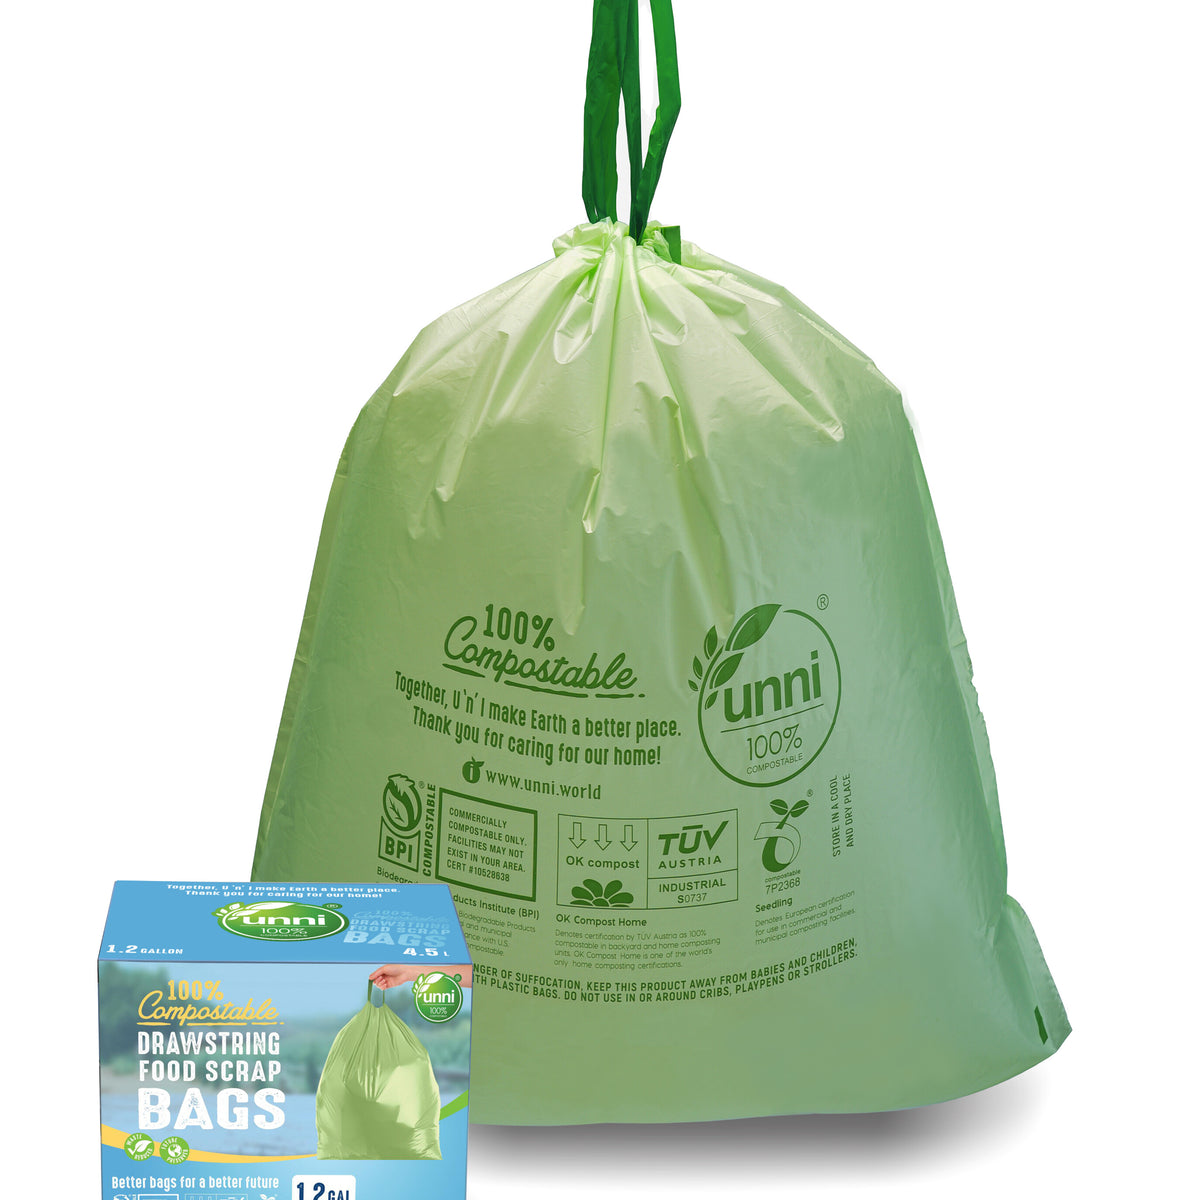 2 - Pack of biodegradable garbage bags, kitchen aide